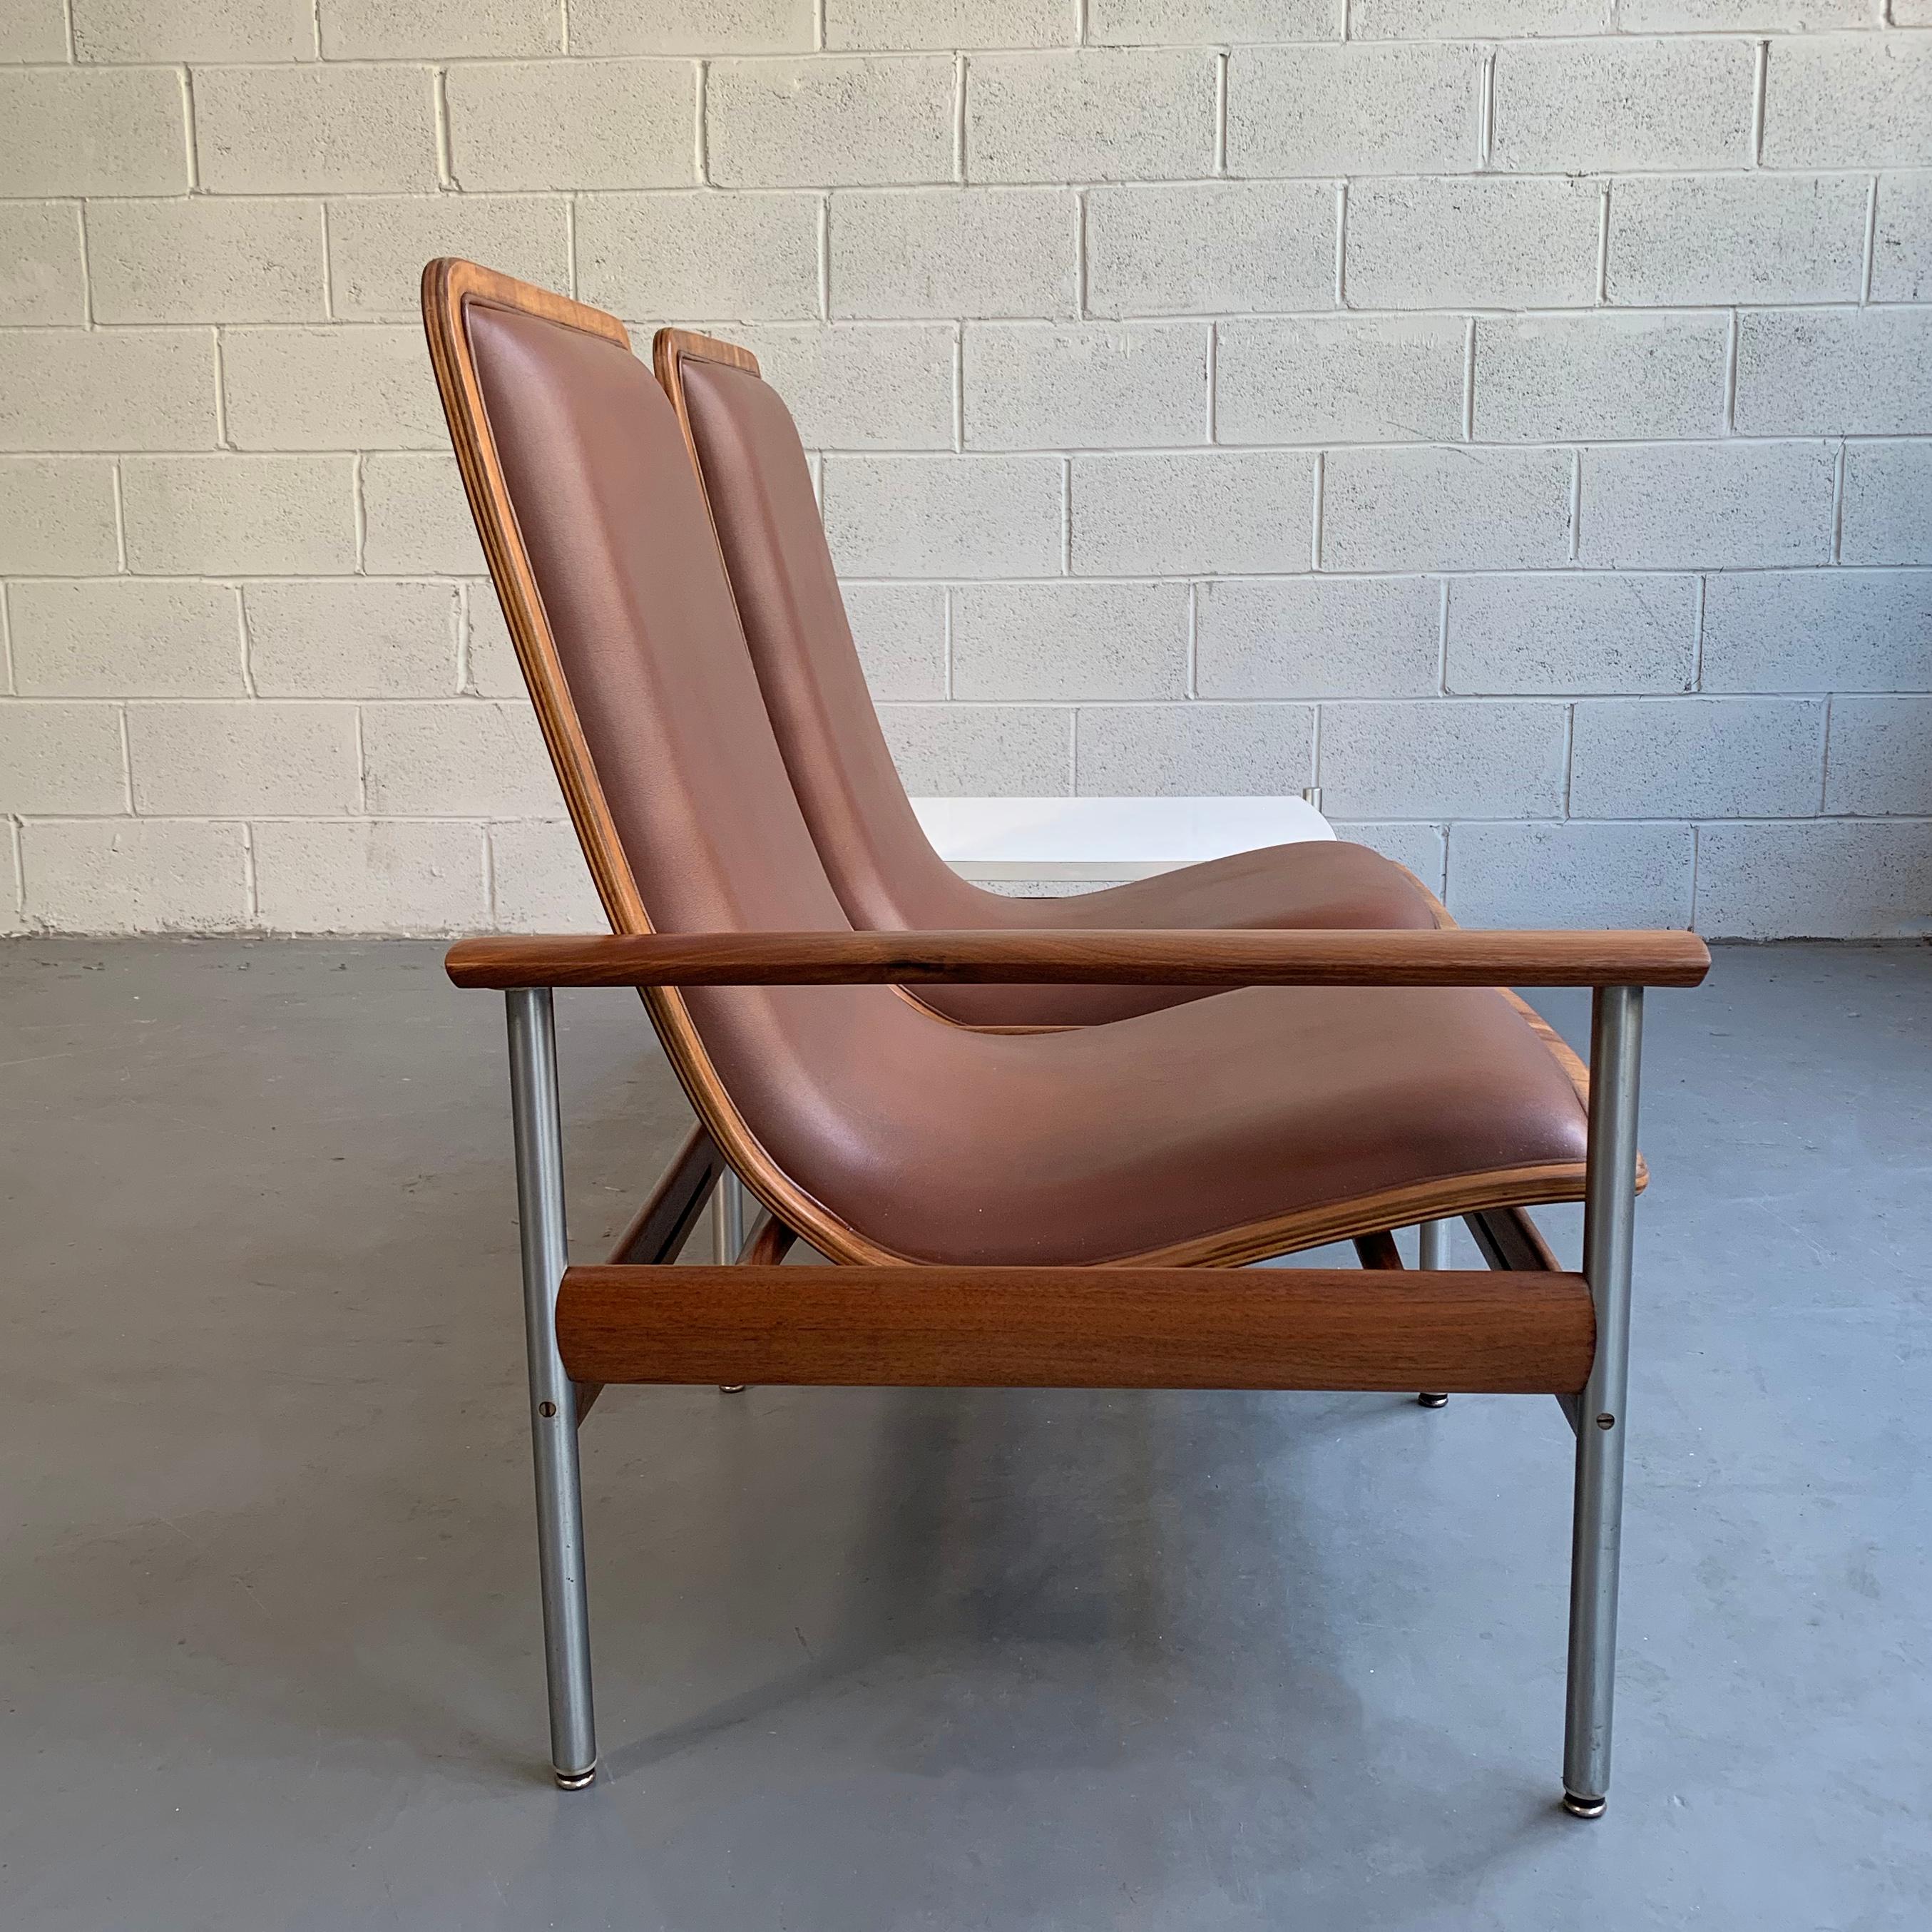 20th Century Scandinavian Modern Seating and Table Ensemble by Sven Ivar Dysthe